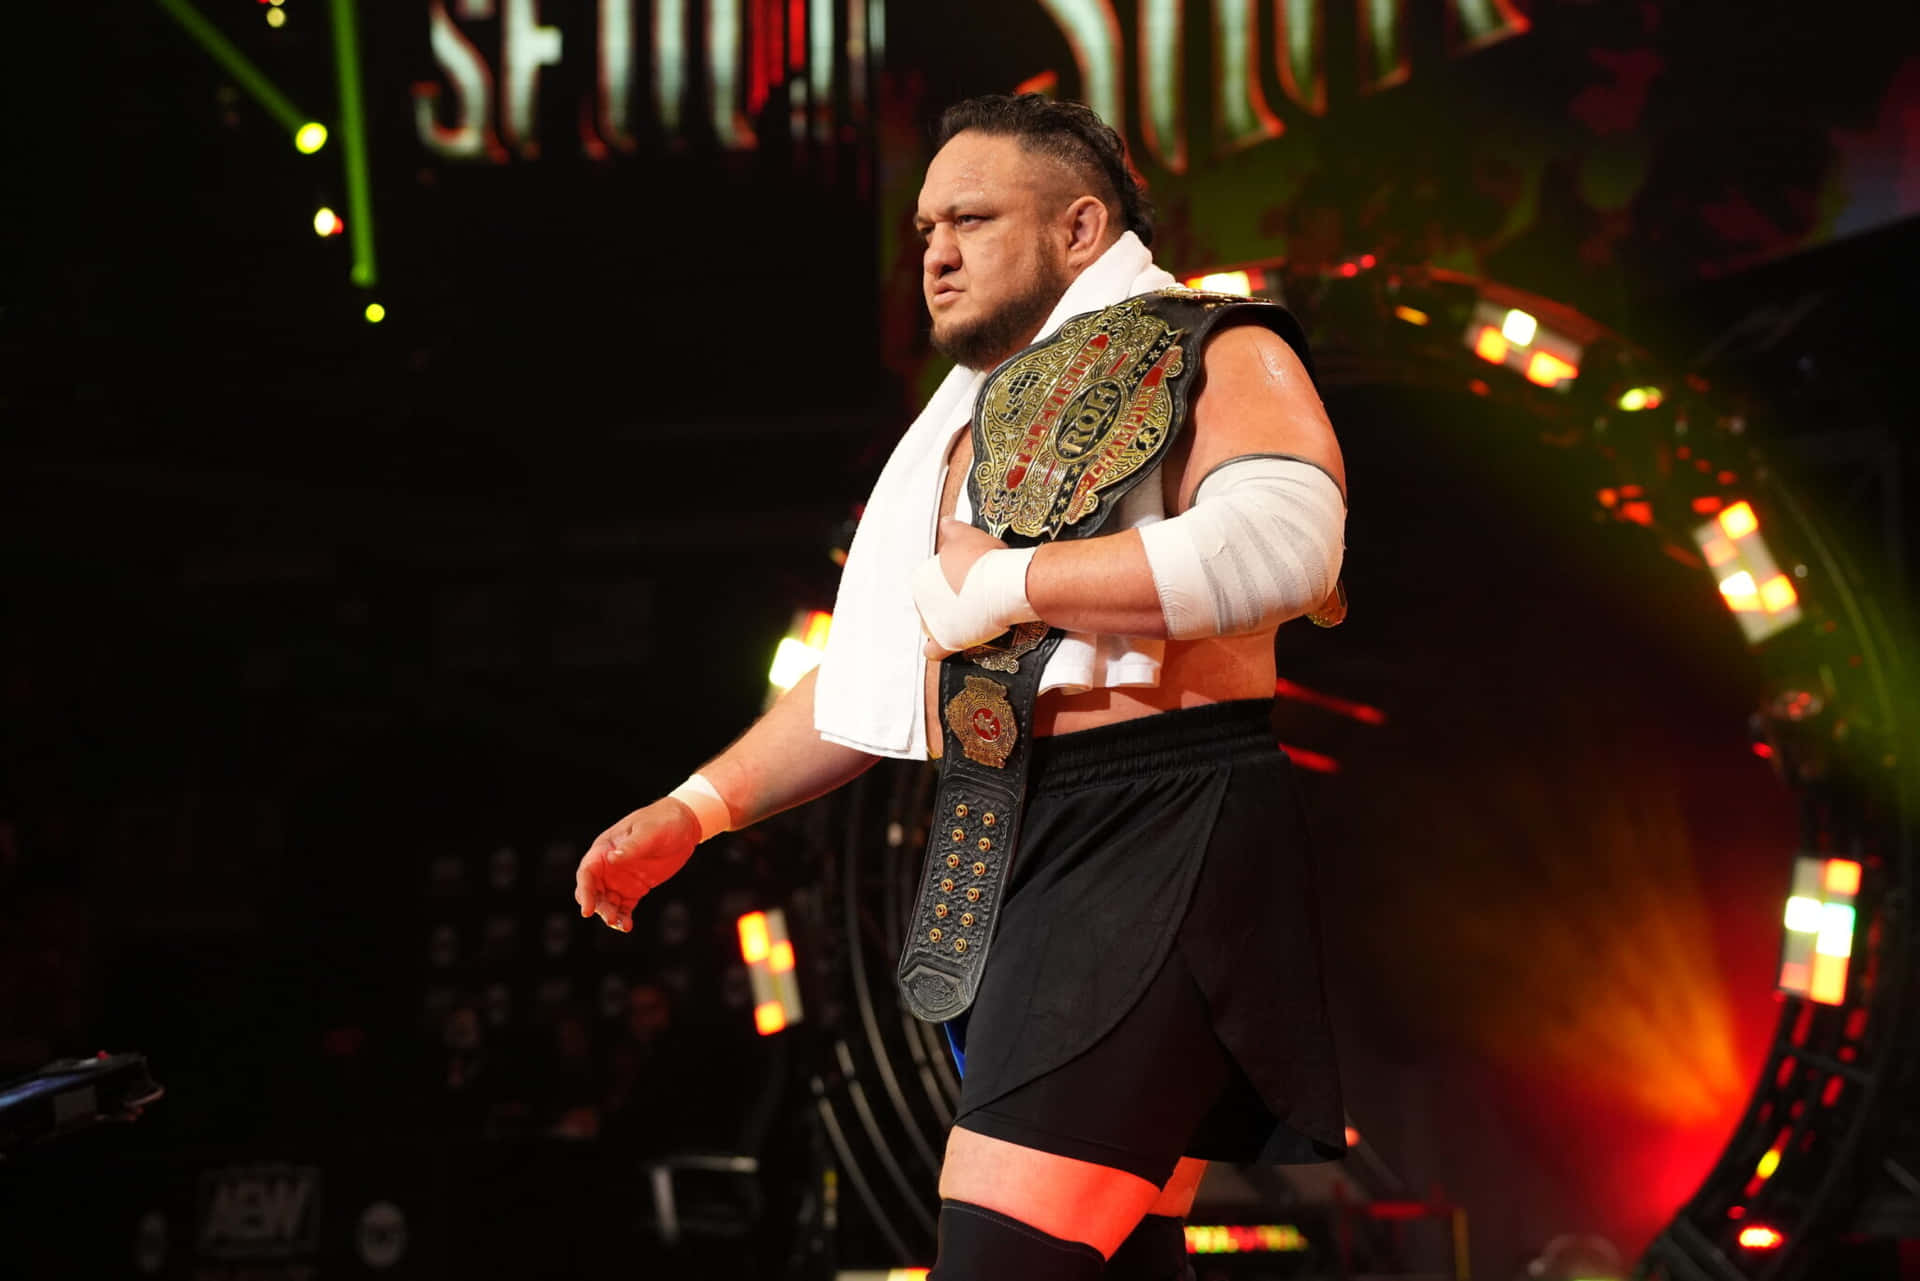 Samoa Joe in action during the United States Championship Match Wallpaper